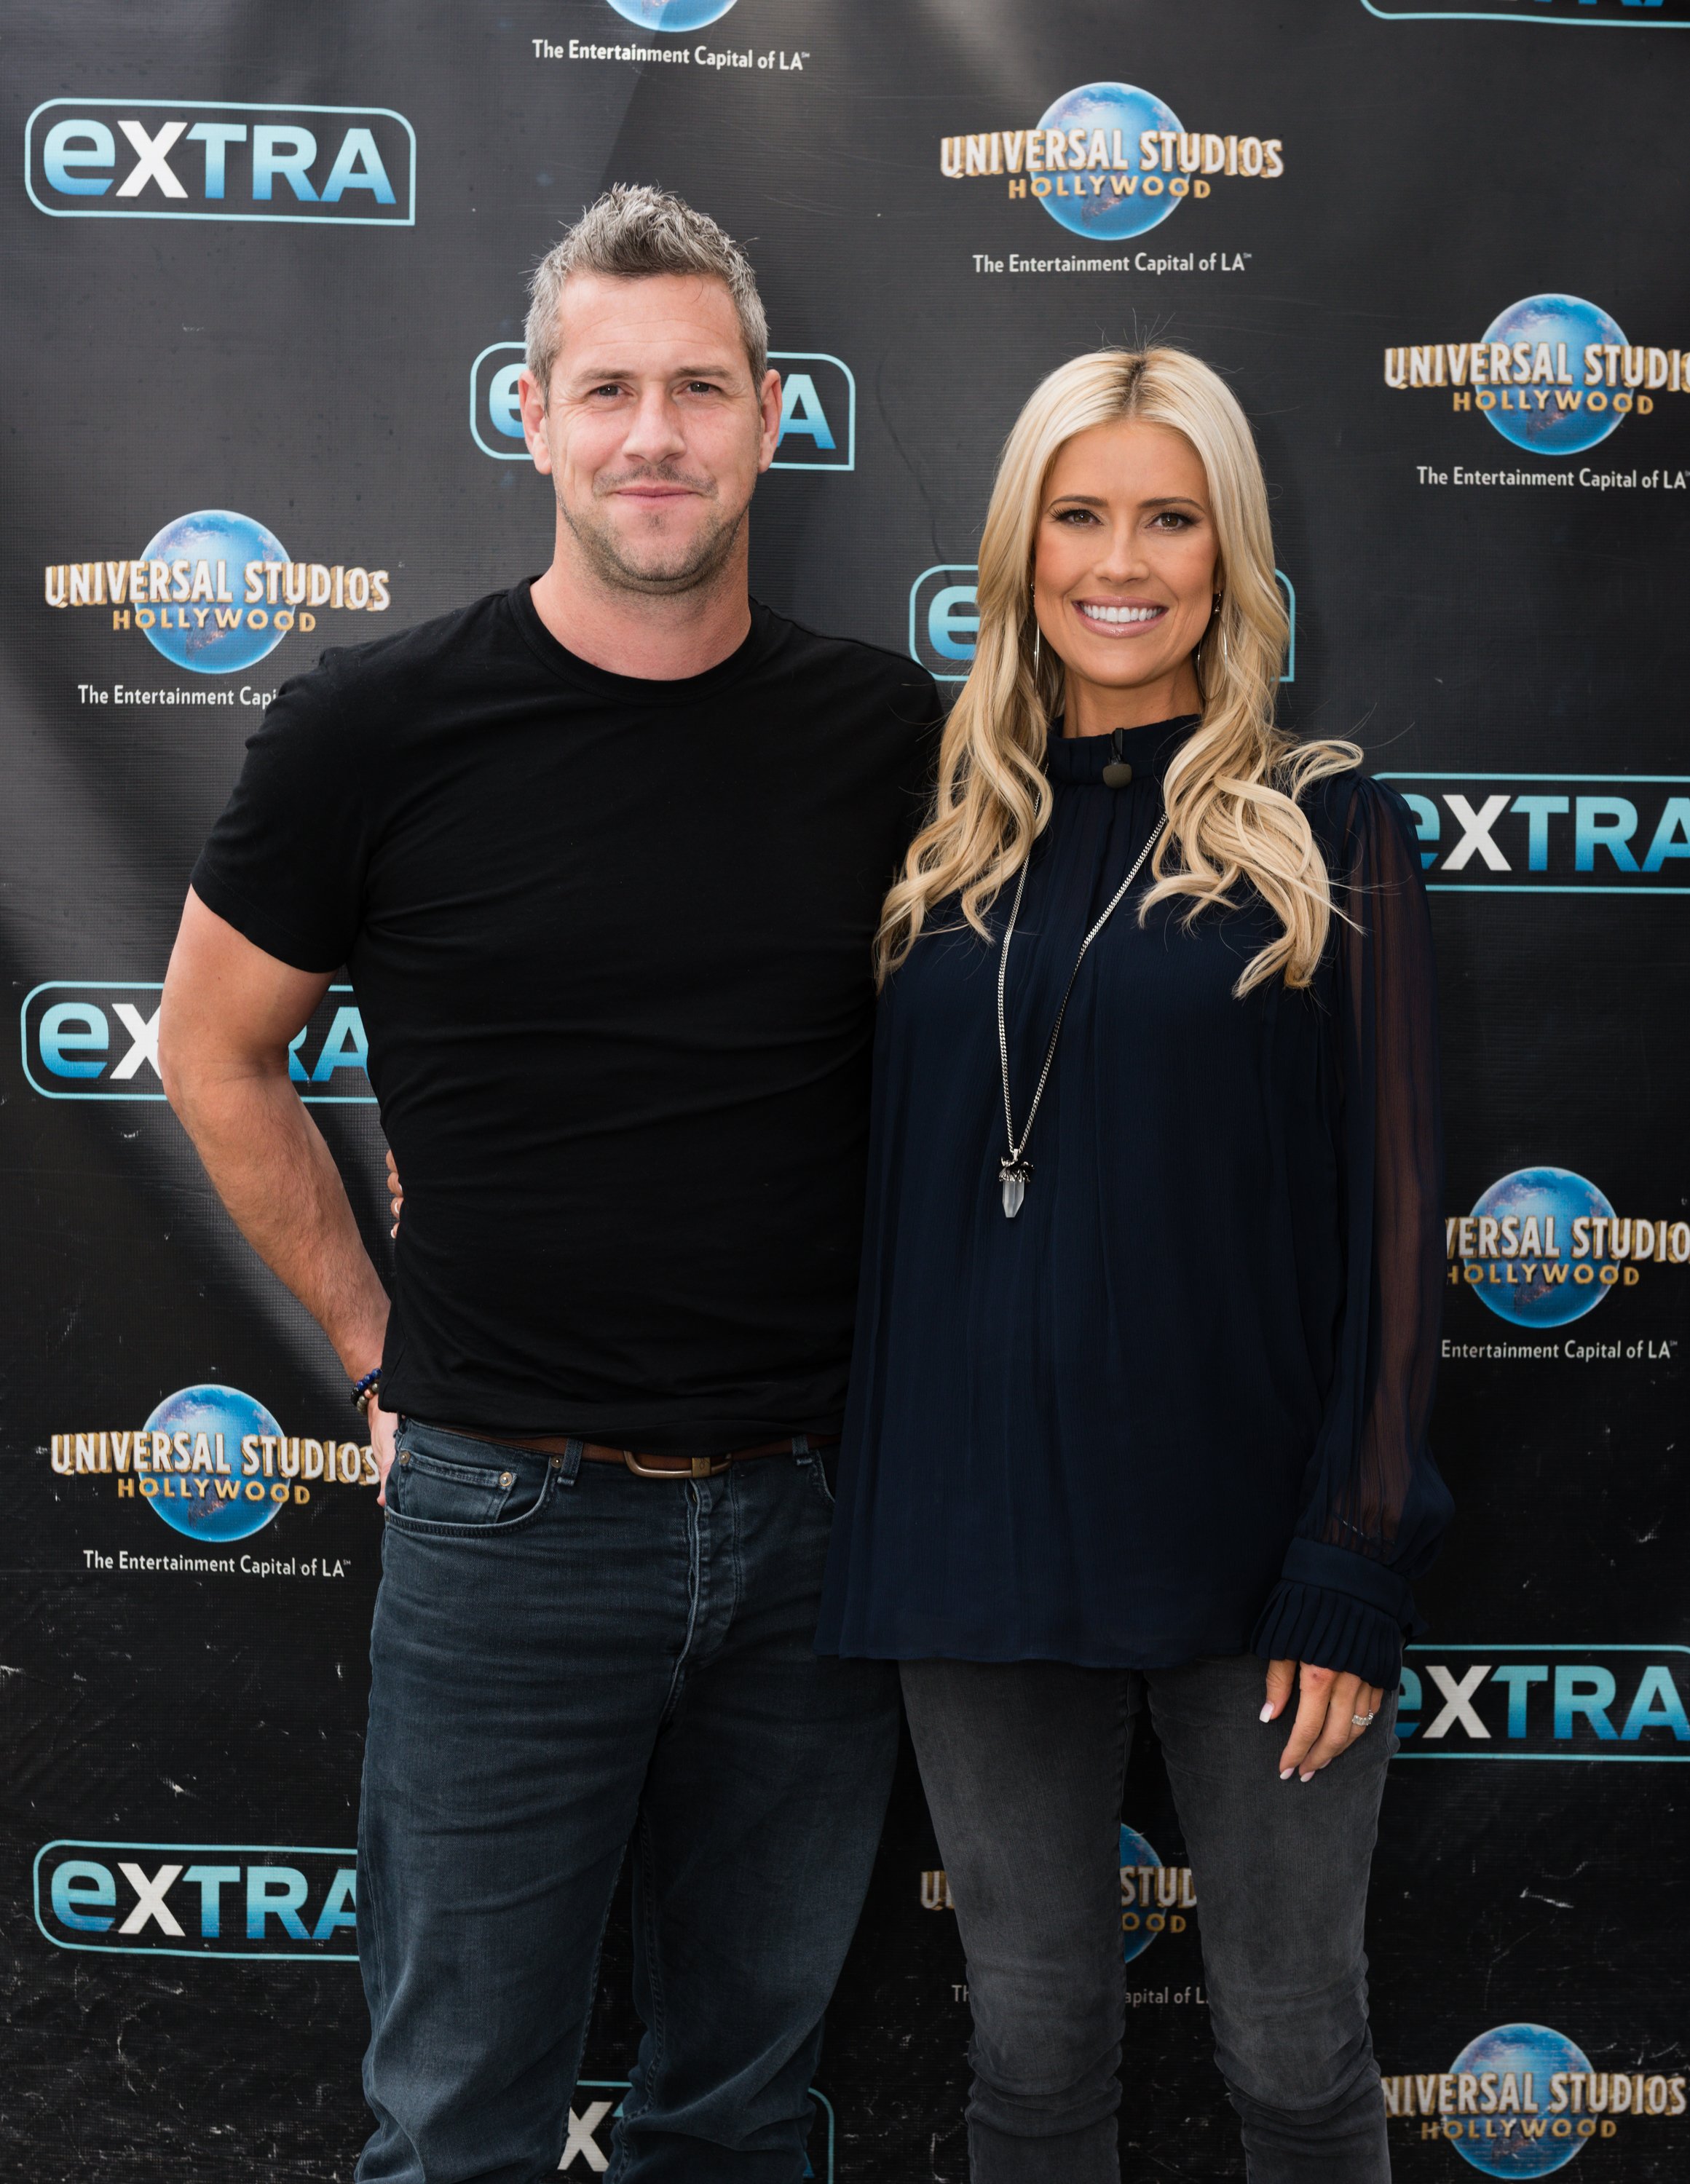 Christina Anstead and Ant Anstead visit "Extra" at Universal Studios Hollywood on May 22, 2019 | Photo: Getty Images